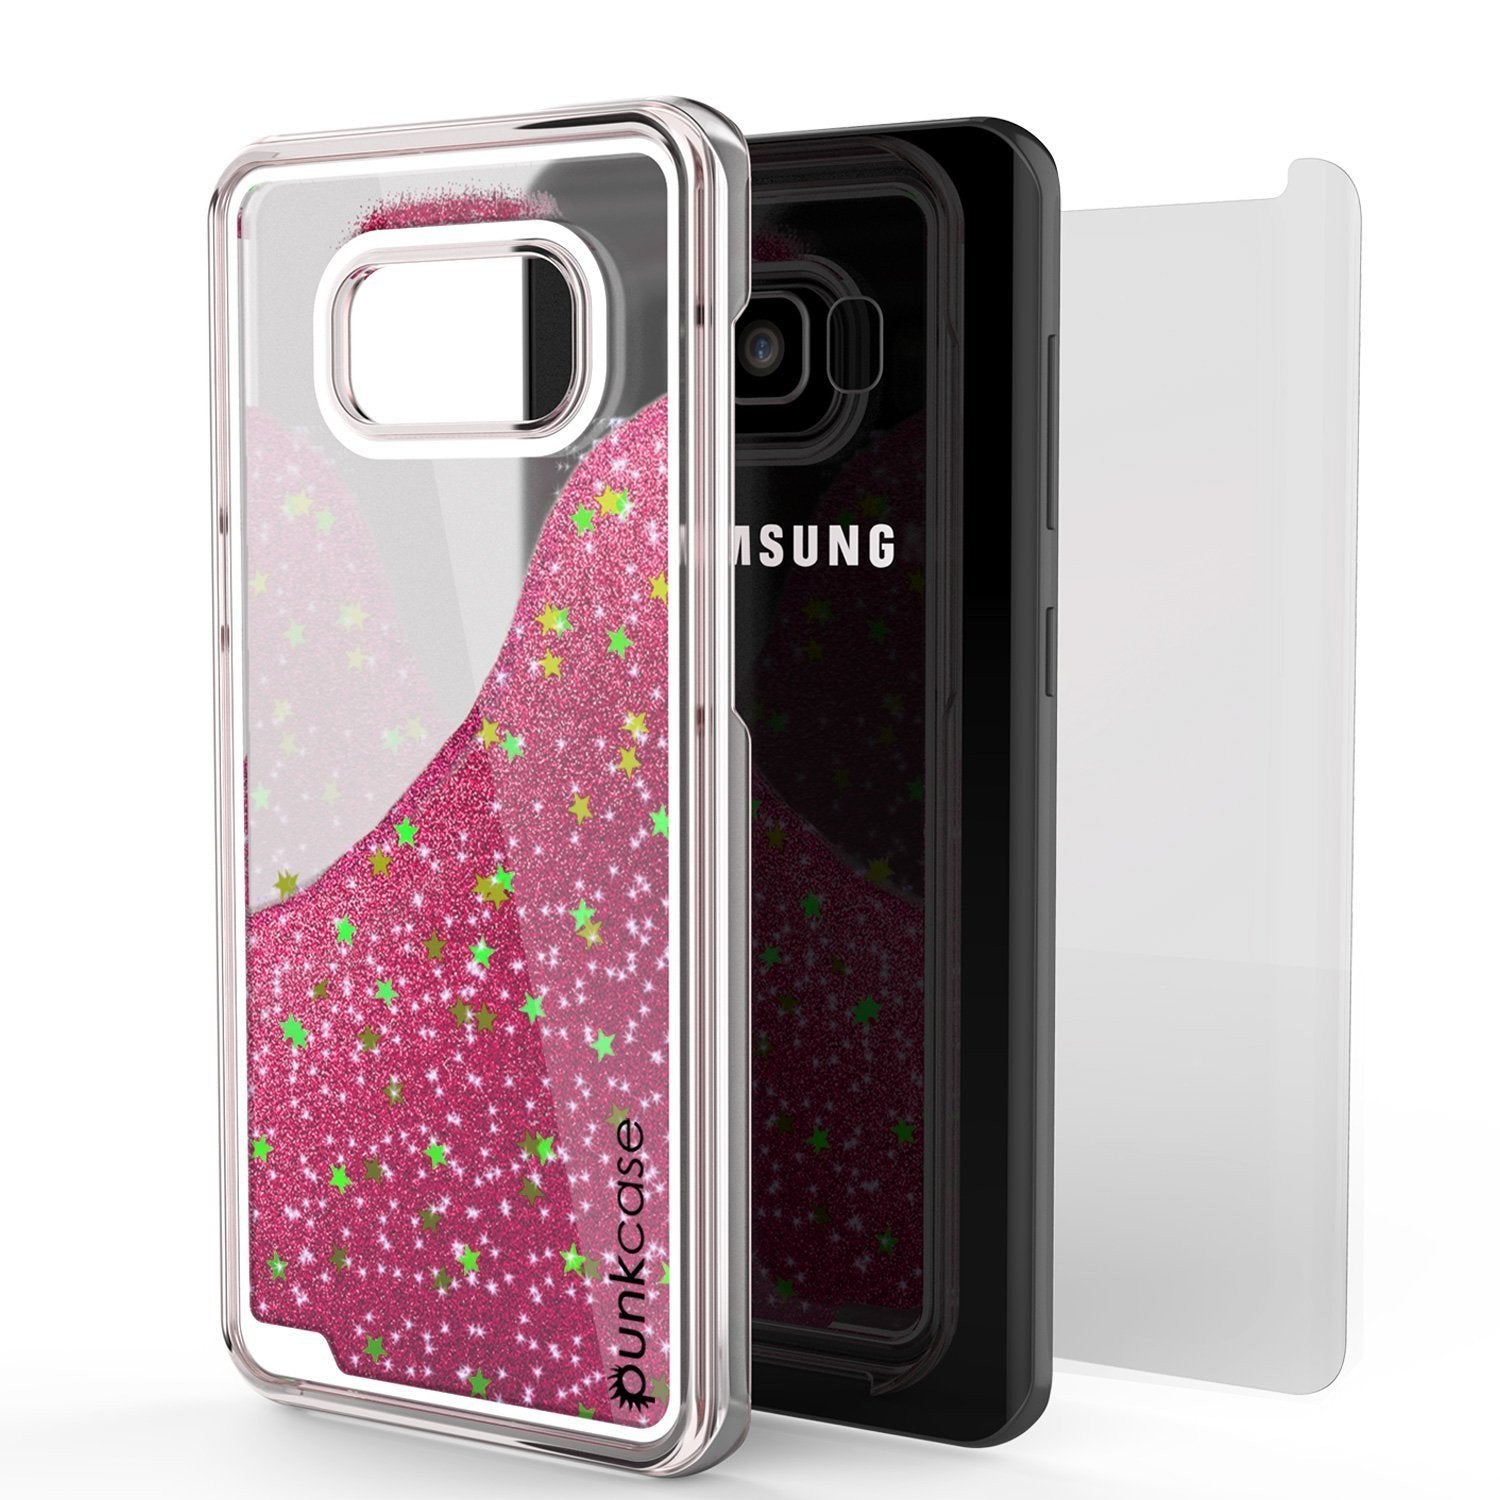 S8 Plus Case, Punkcase Liquid Pink Series Protective Dual Layer Floating Glitter Cover